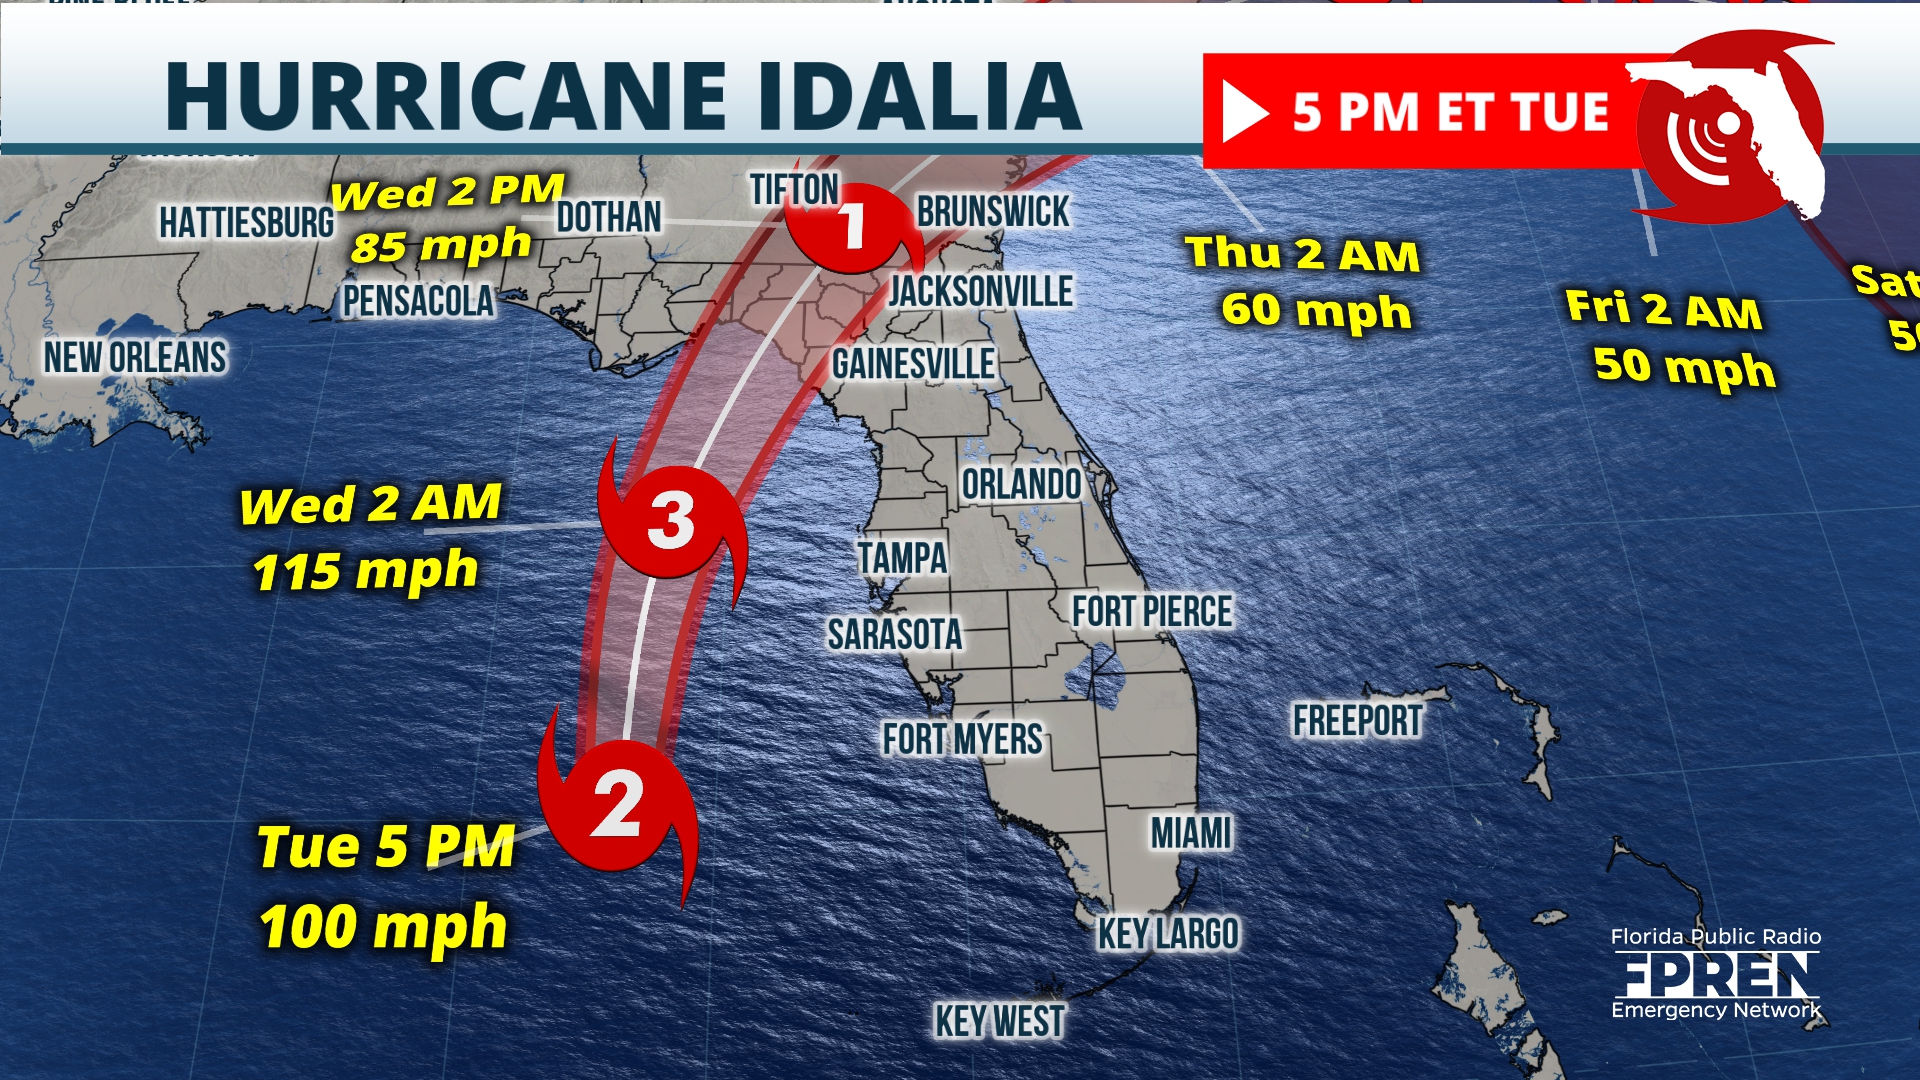 Featured image for “Idalia’s winds expected to hit Jax early Wednesday”